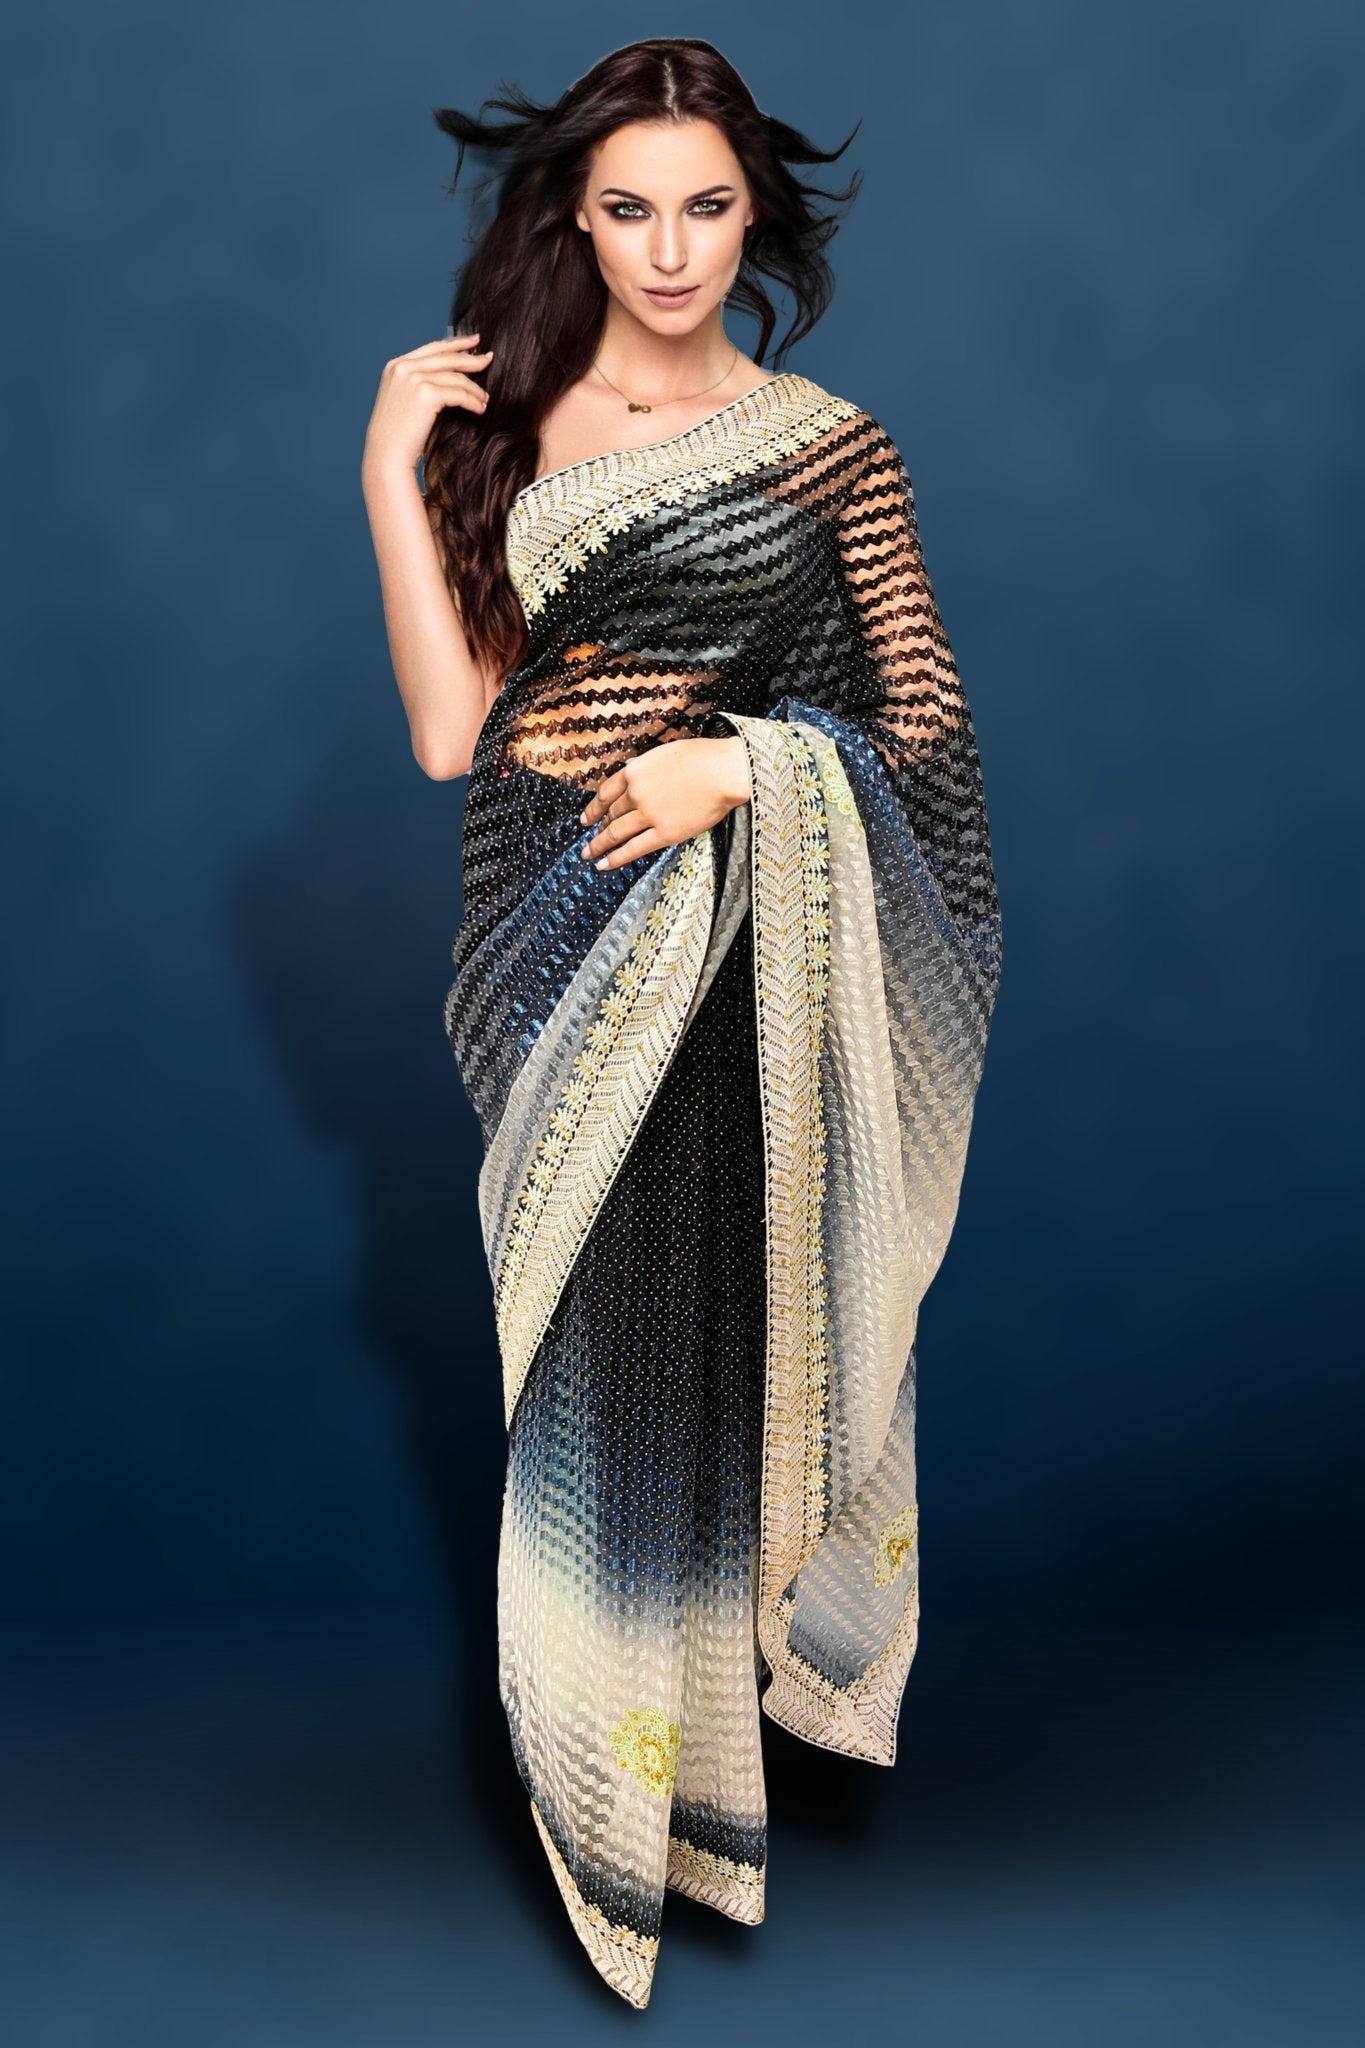 Look Gorgeous in These Unique Saree Draping Styles - Nihal Fashions Blog